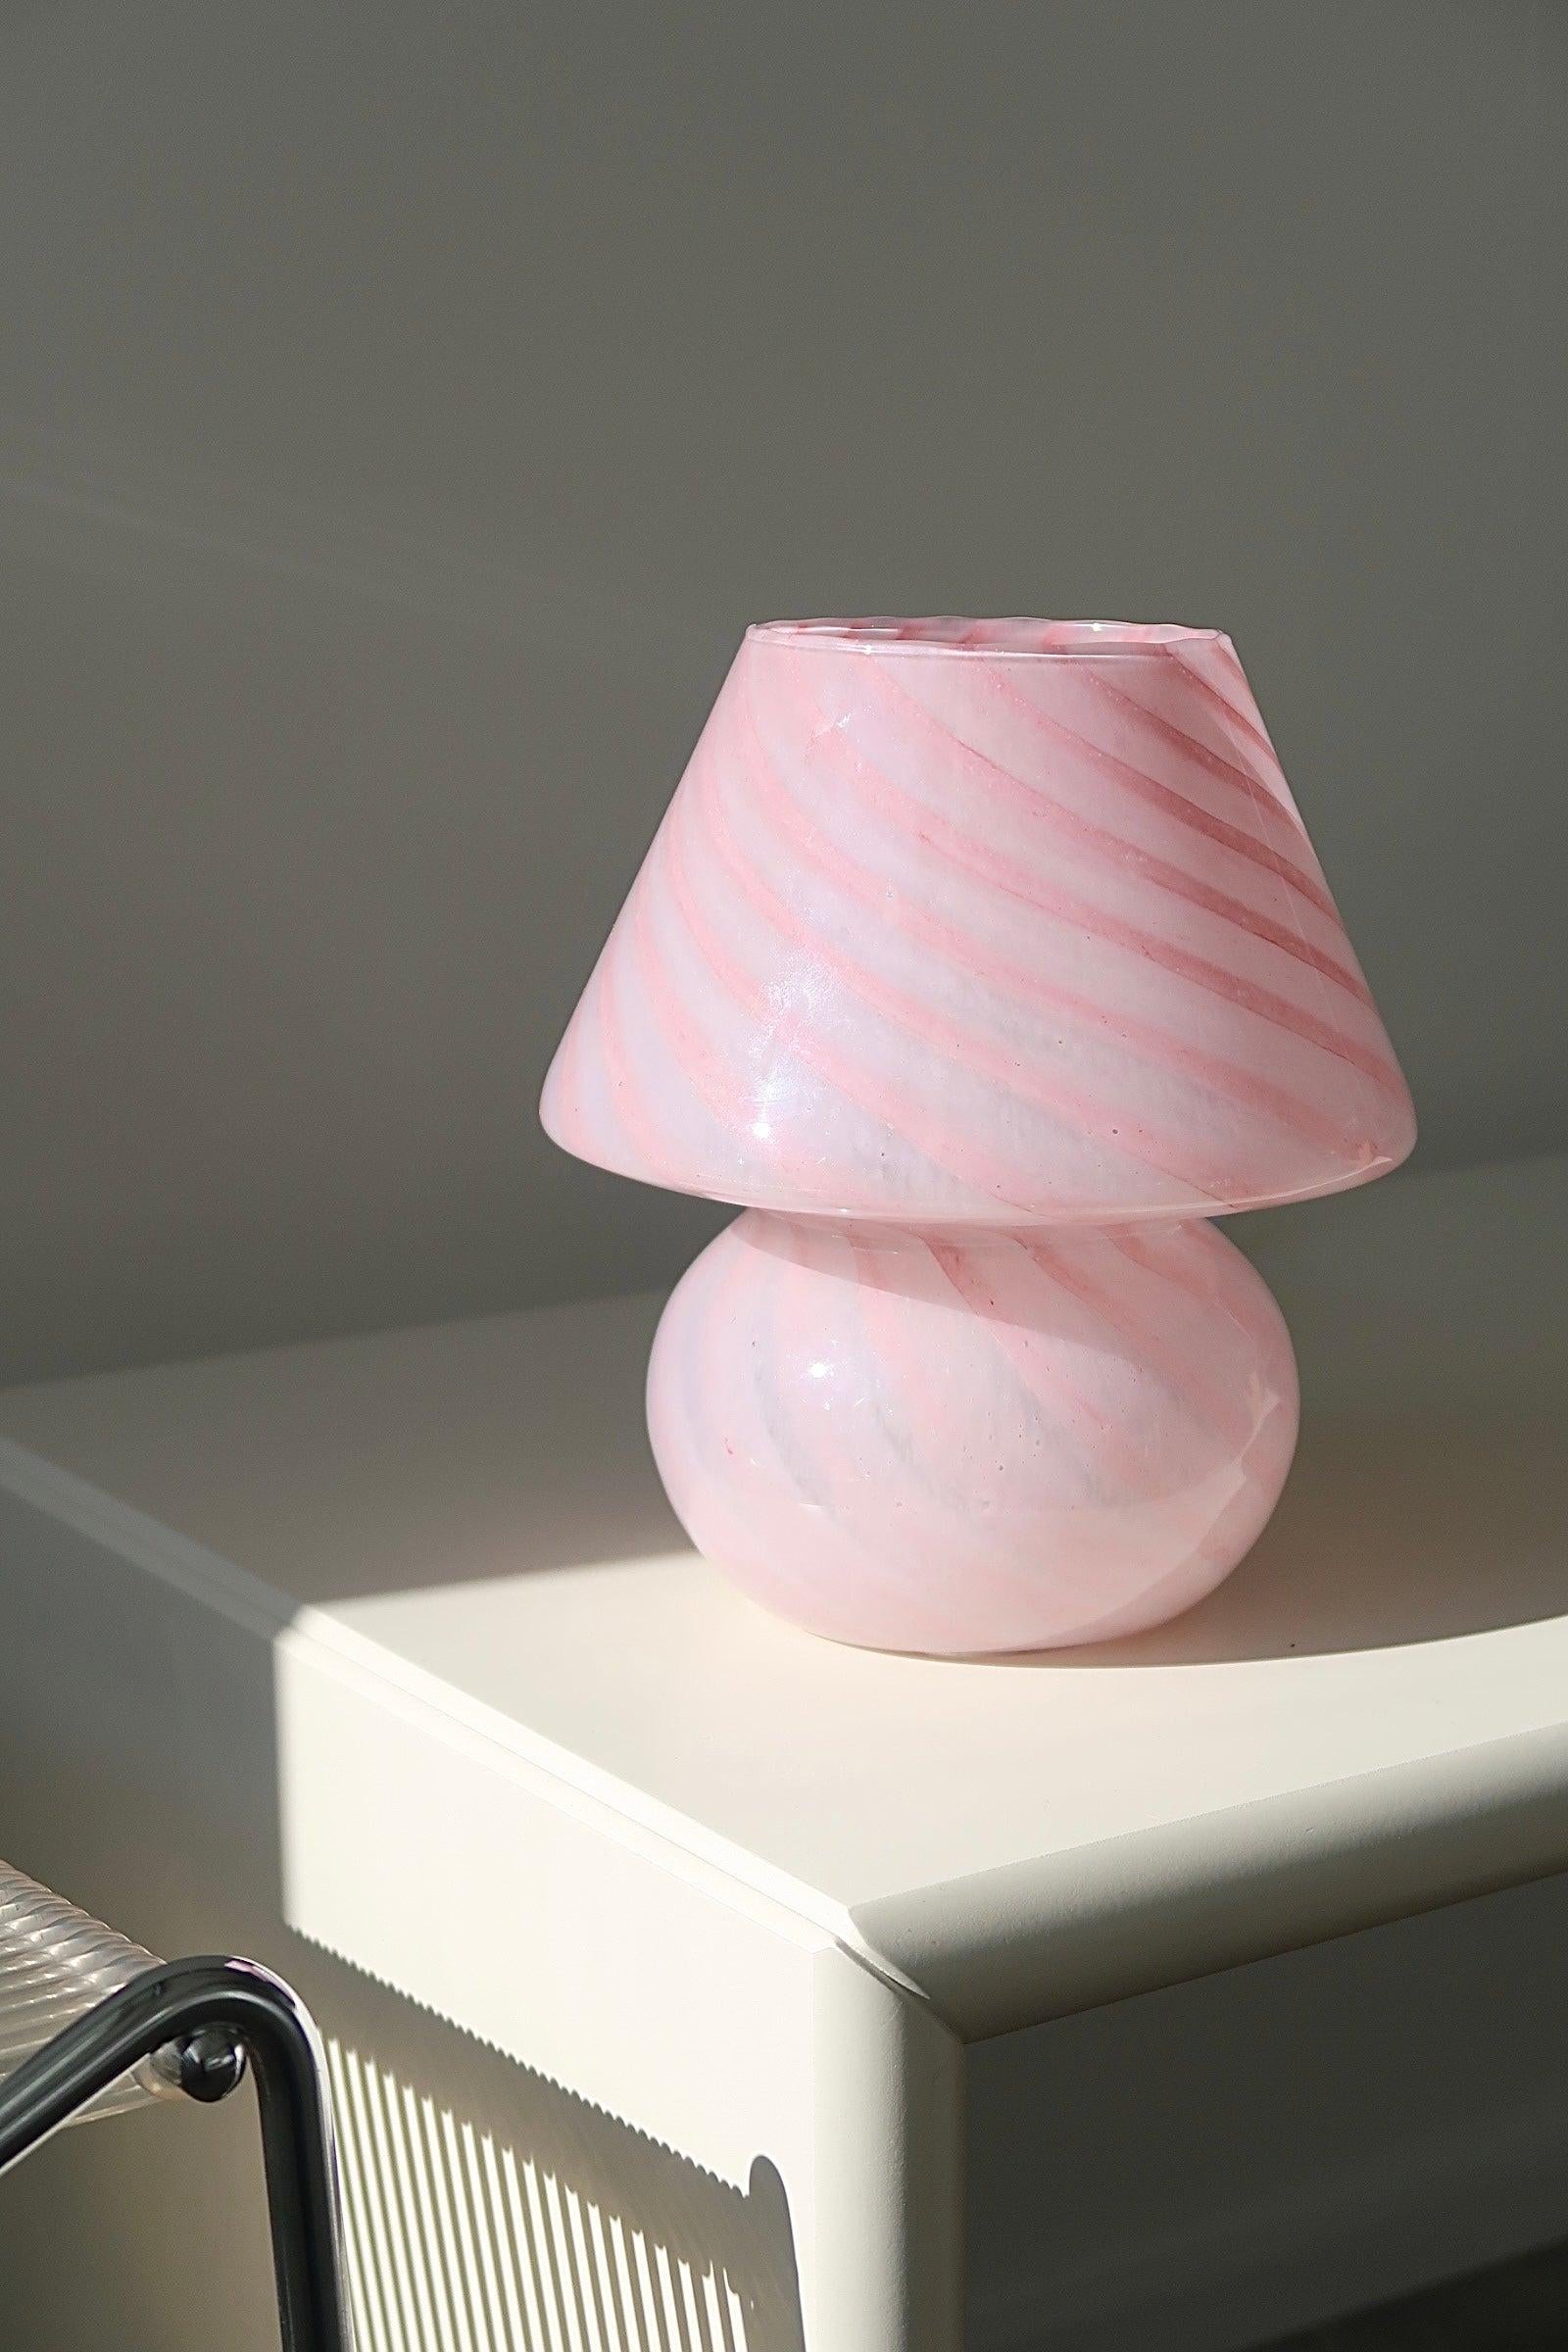 Vintage Murano baby mushroom table lamp. Mouth blown in pink glass with swirl pattern. Handmade in Italy, 1970s. H:18.5 D:16 cm.